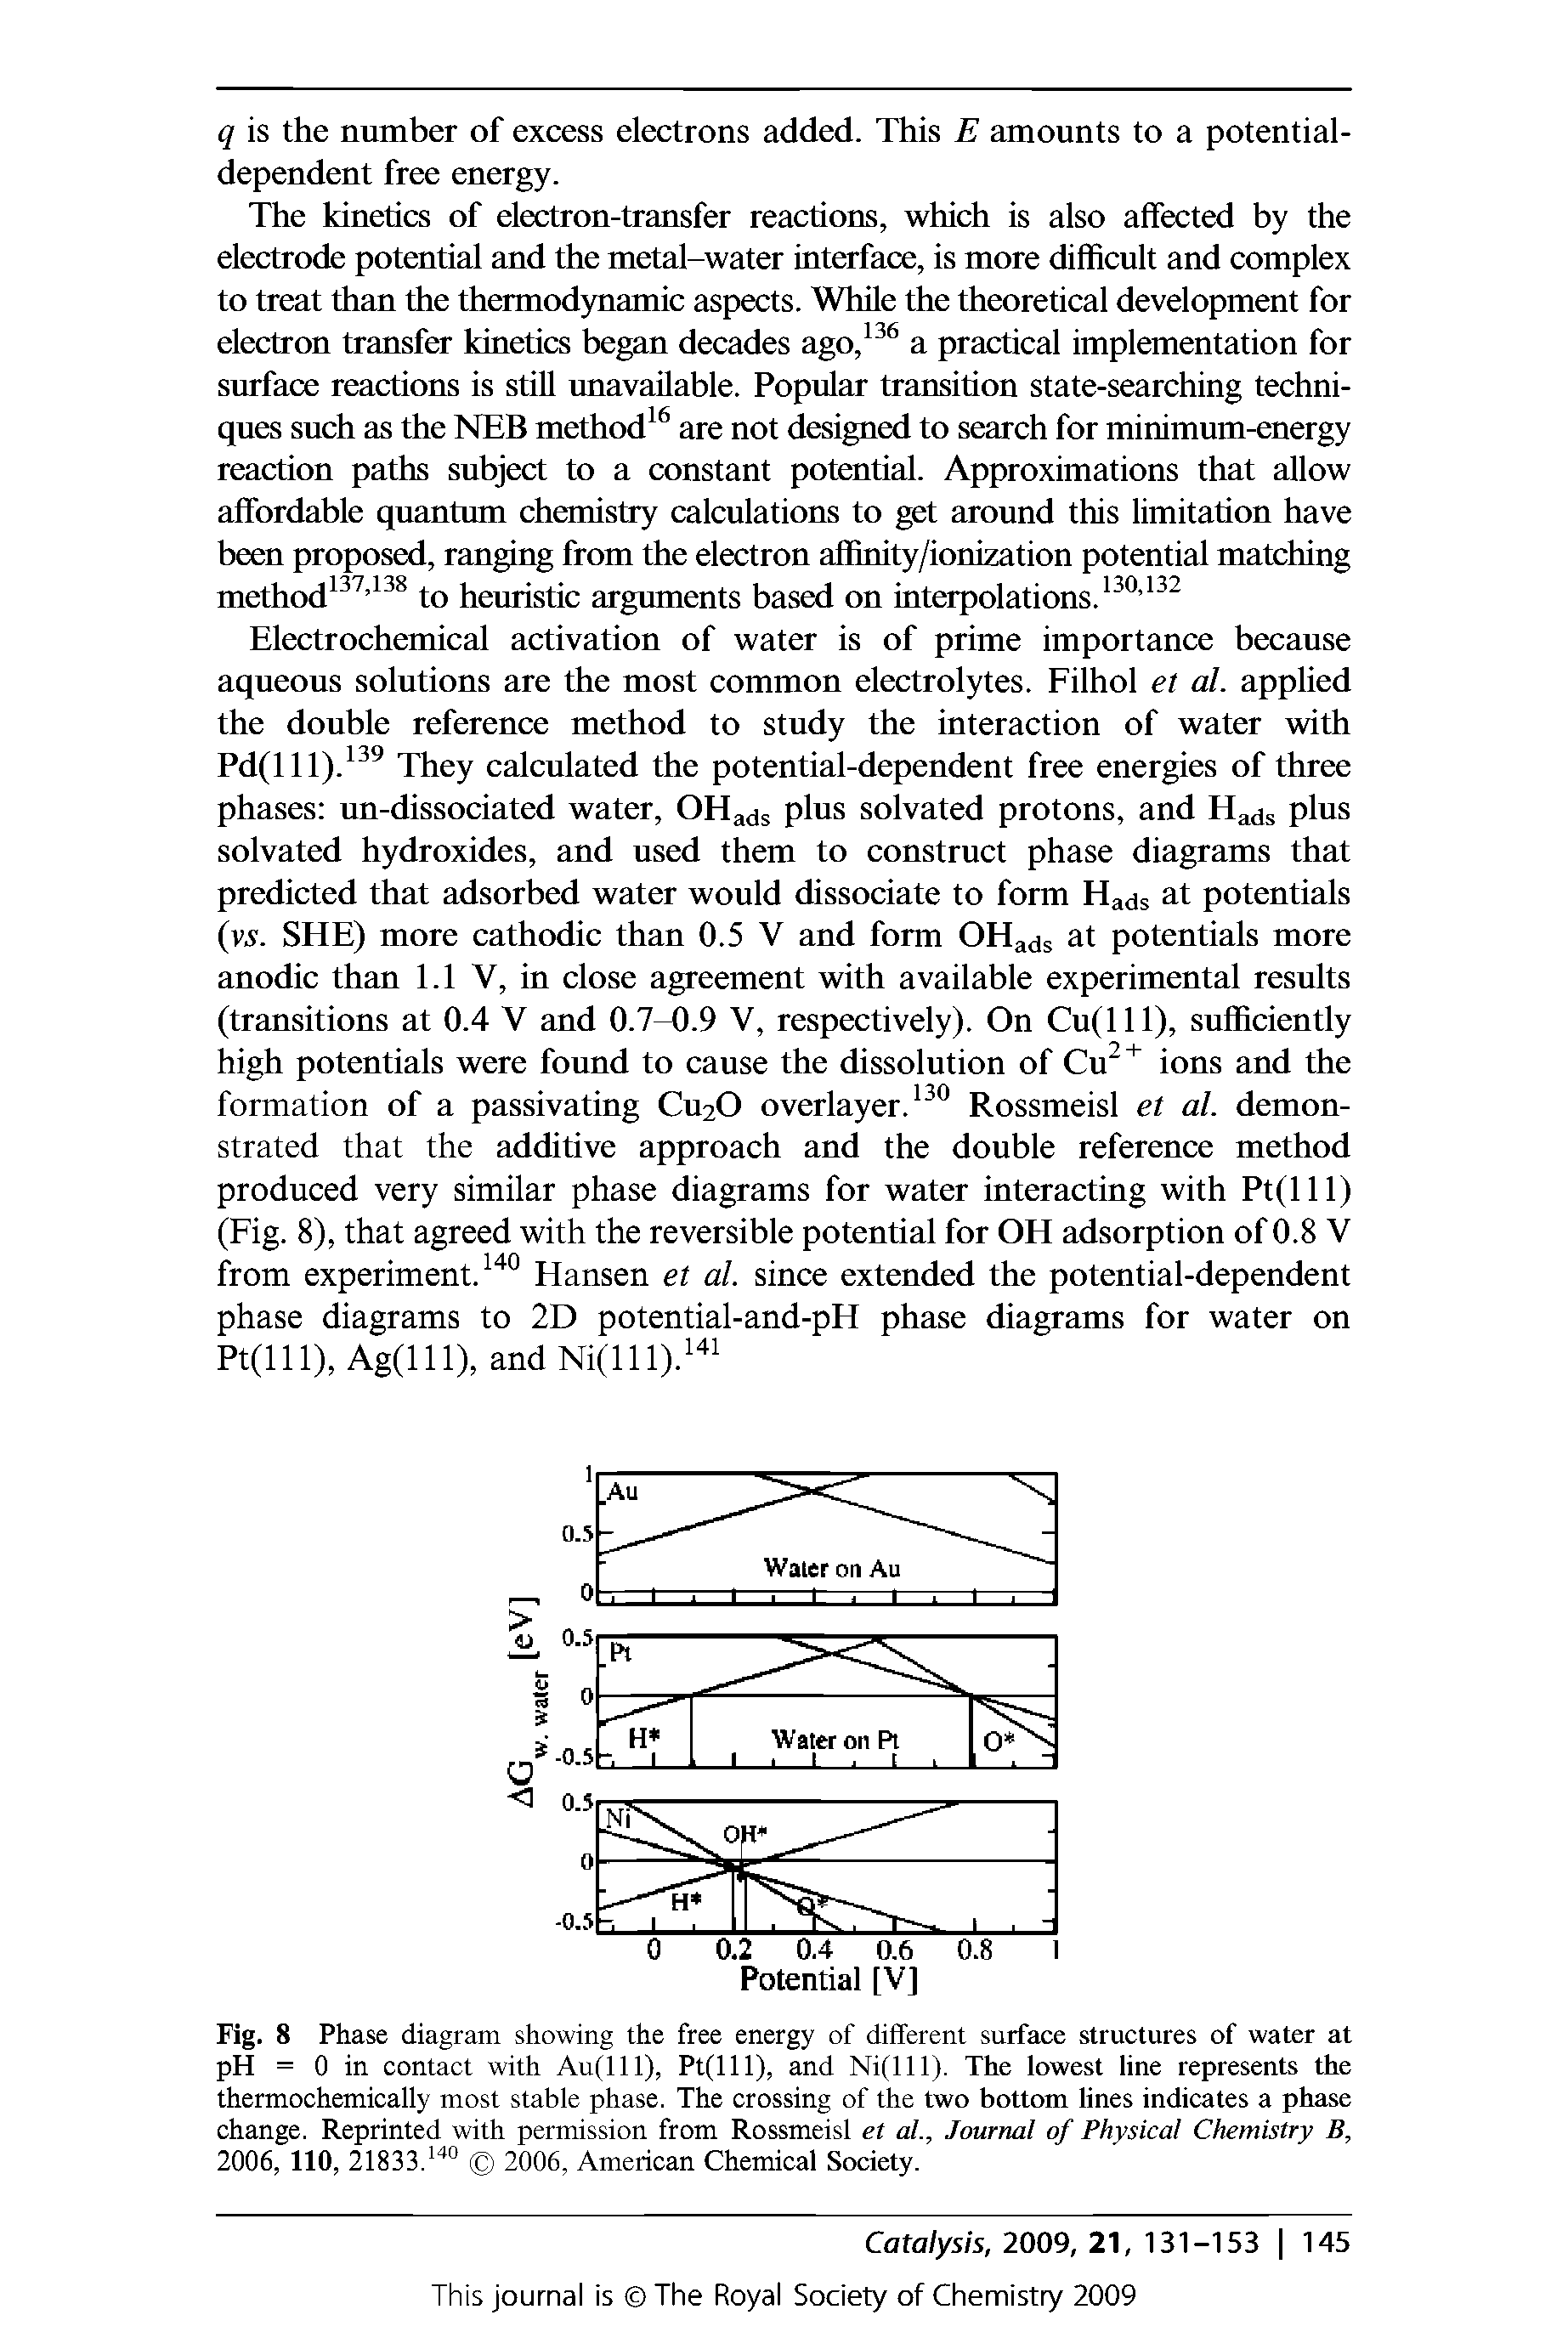 Fig. 8 Phase diagram showing the free energy of different surface structures of water at pH = 0 in contact with Au(lll), Pt(lll), and Ni(lll). The lowest line represents the thermochemically most stable phase. The crossing of the two bottom lines indicates a phase change. Reprinted with permission from Rossmeisl et al.. Journal of Physical Chemistry B, 2006, 110, 21833. 2006, American Chemical Society.